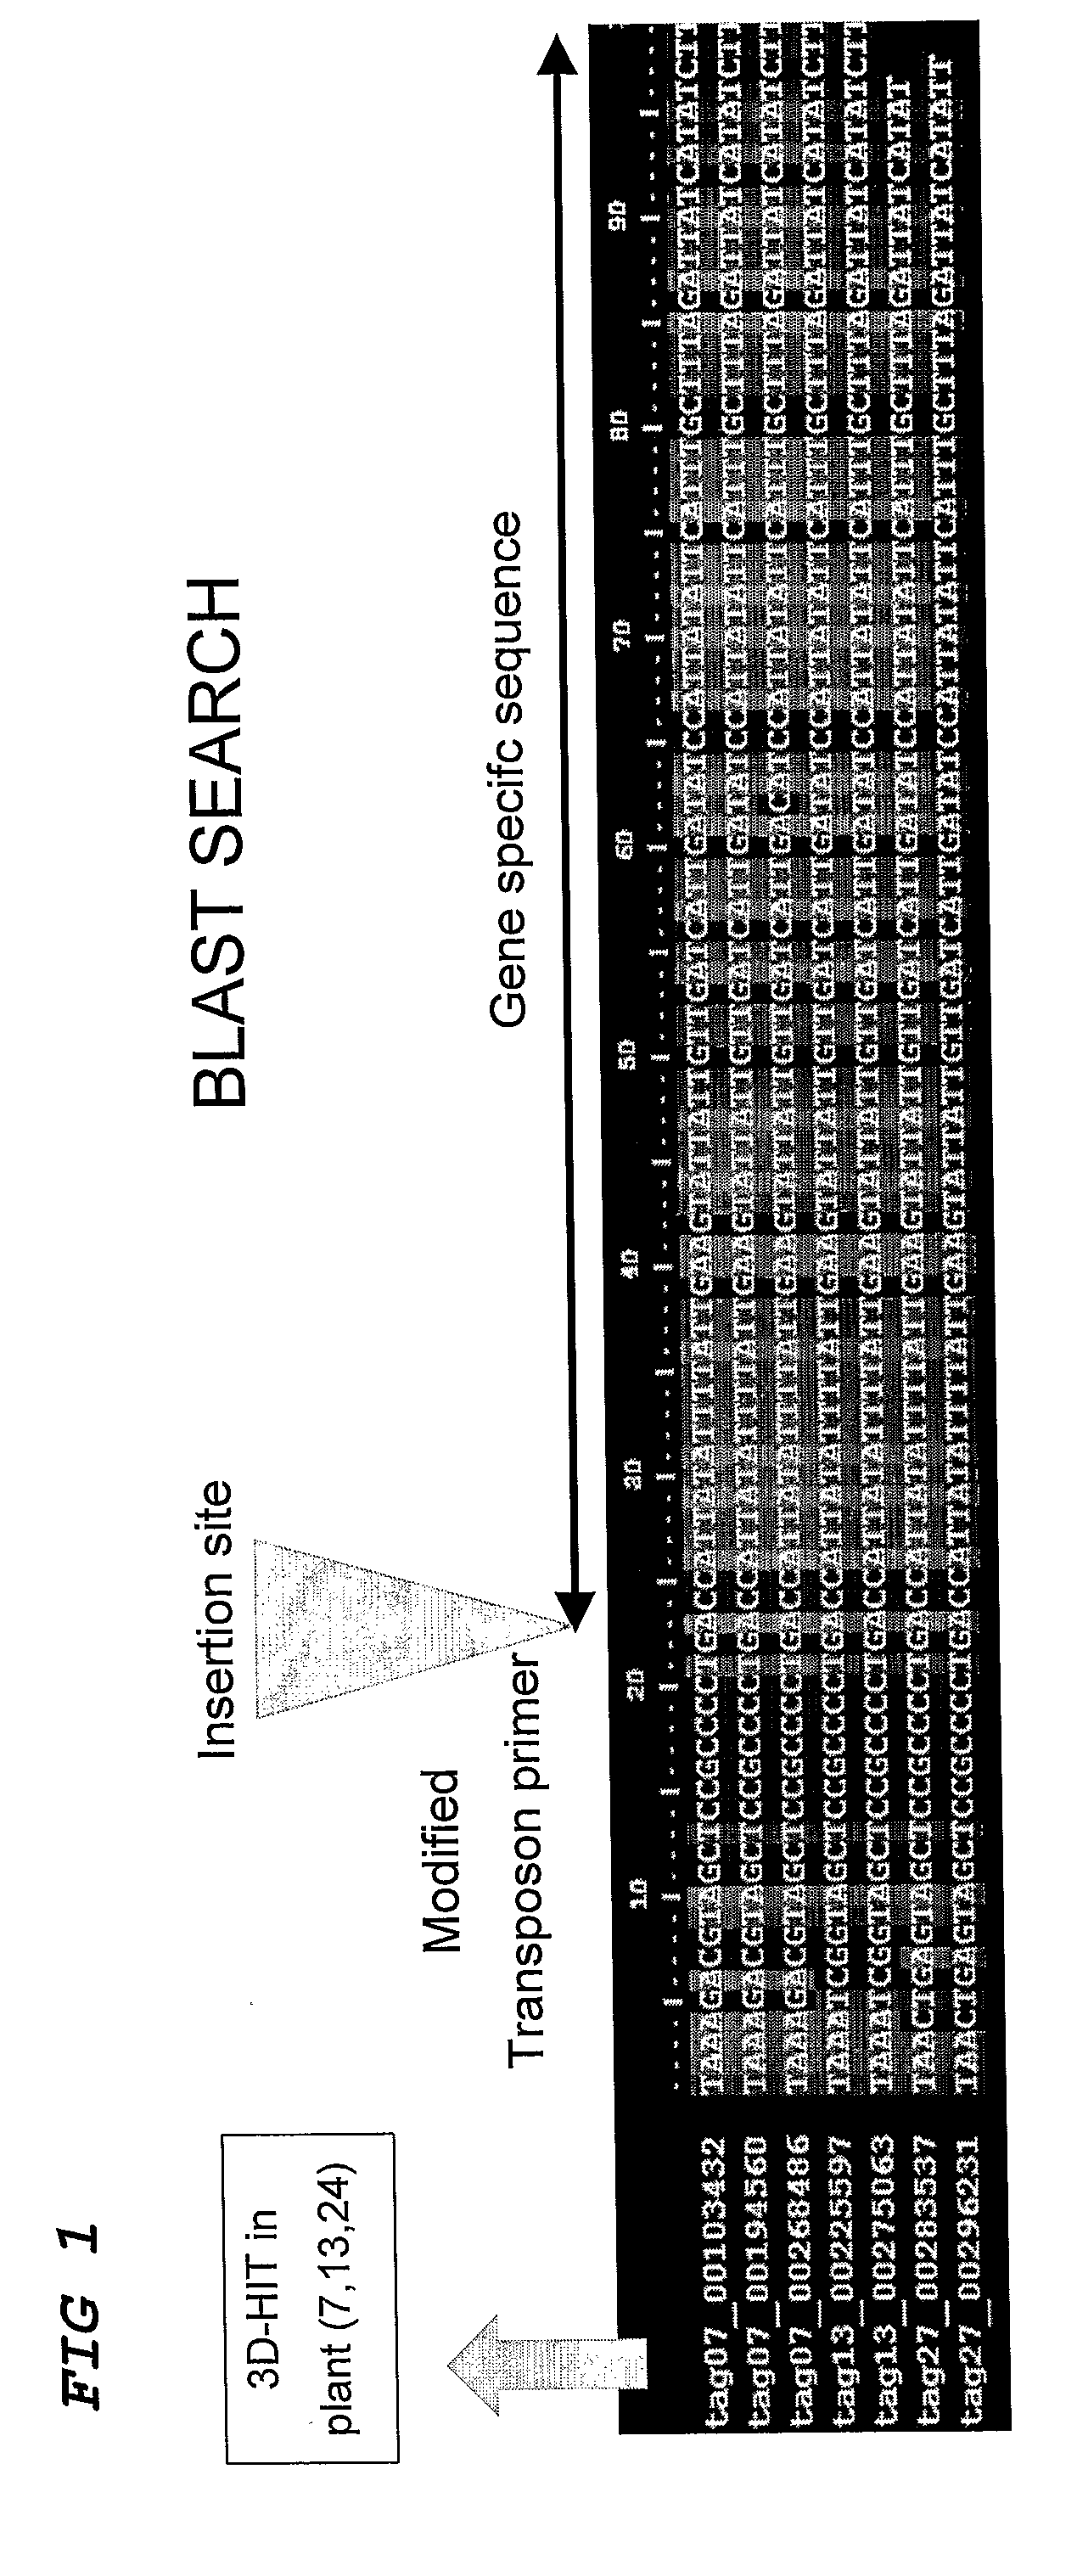 Method for the High Throughput Screening of Transposon Tagging Populations and Massive Parallel Sequence Identification of Insertion Sites